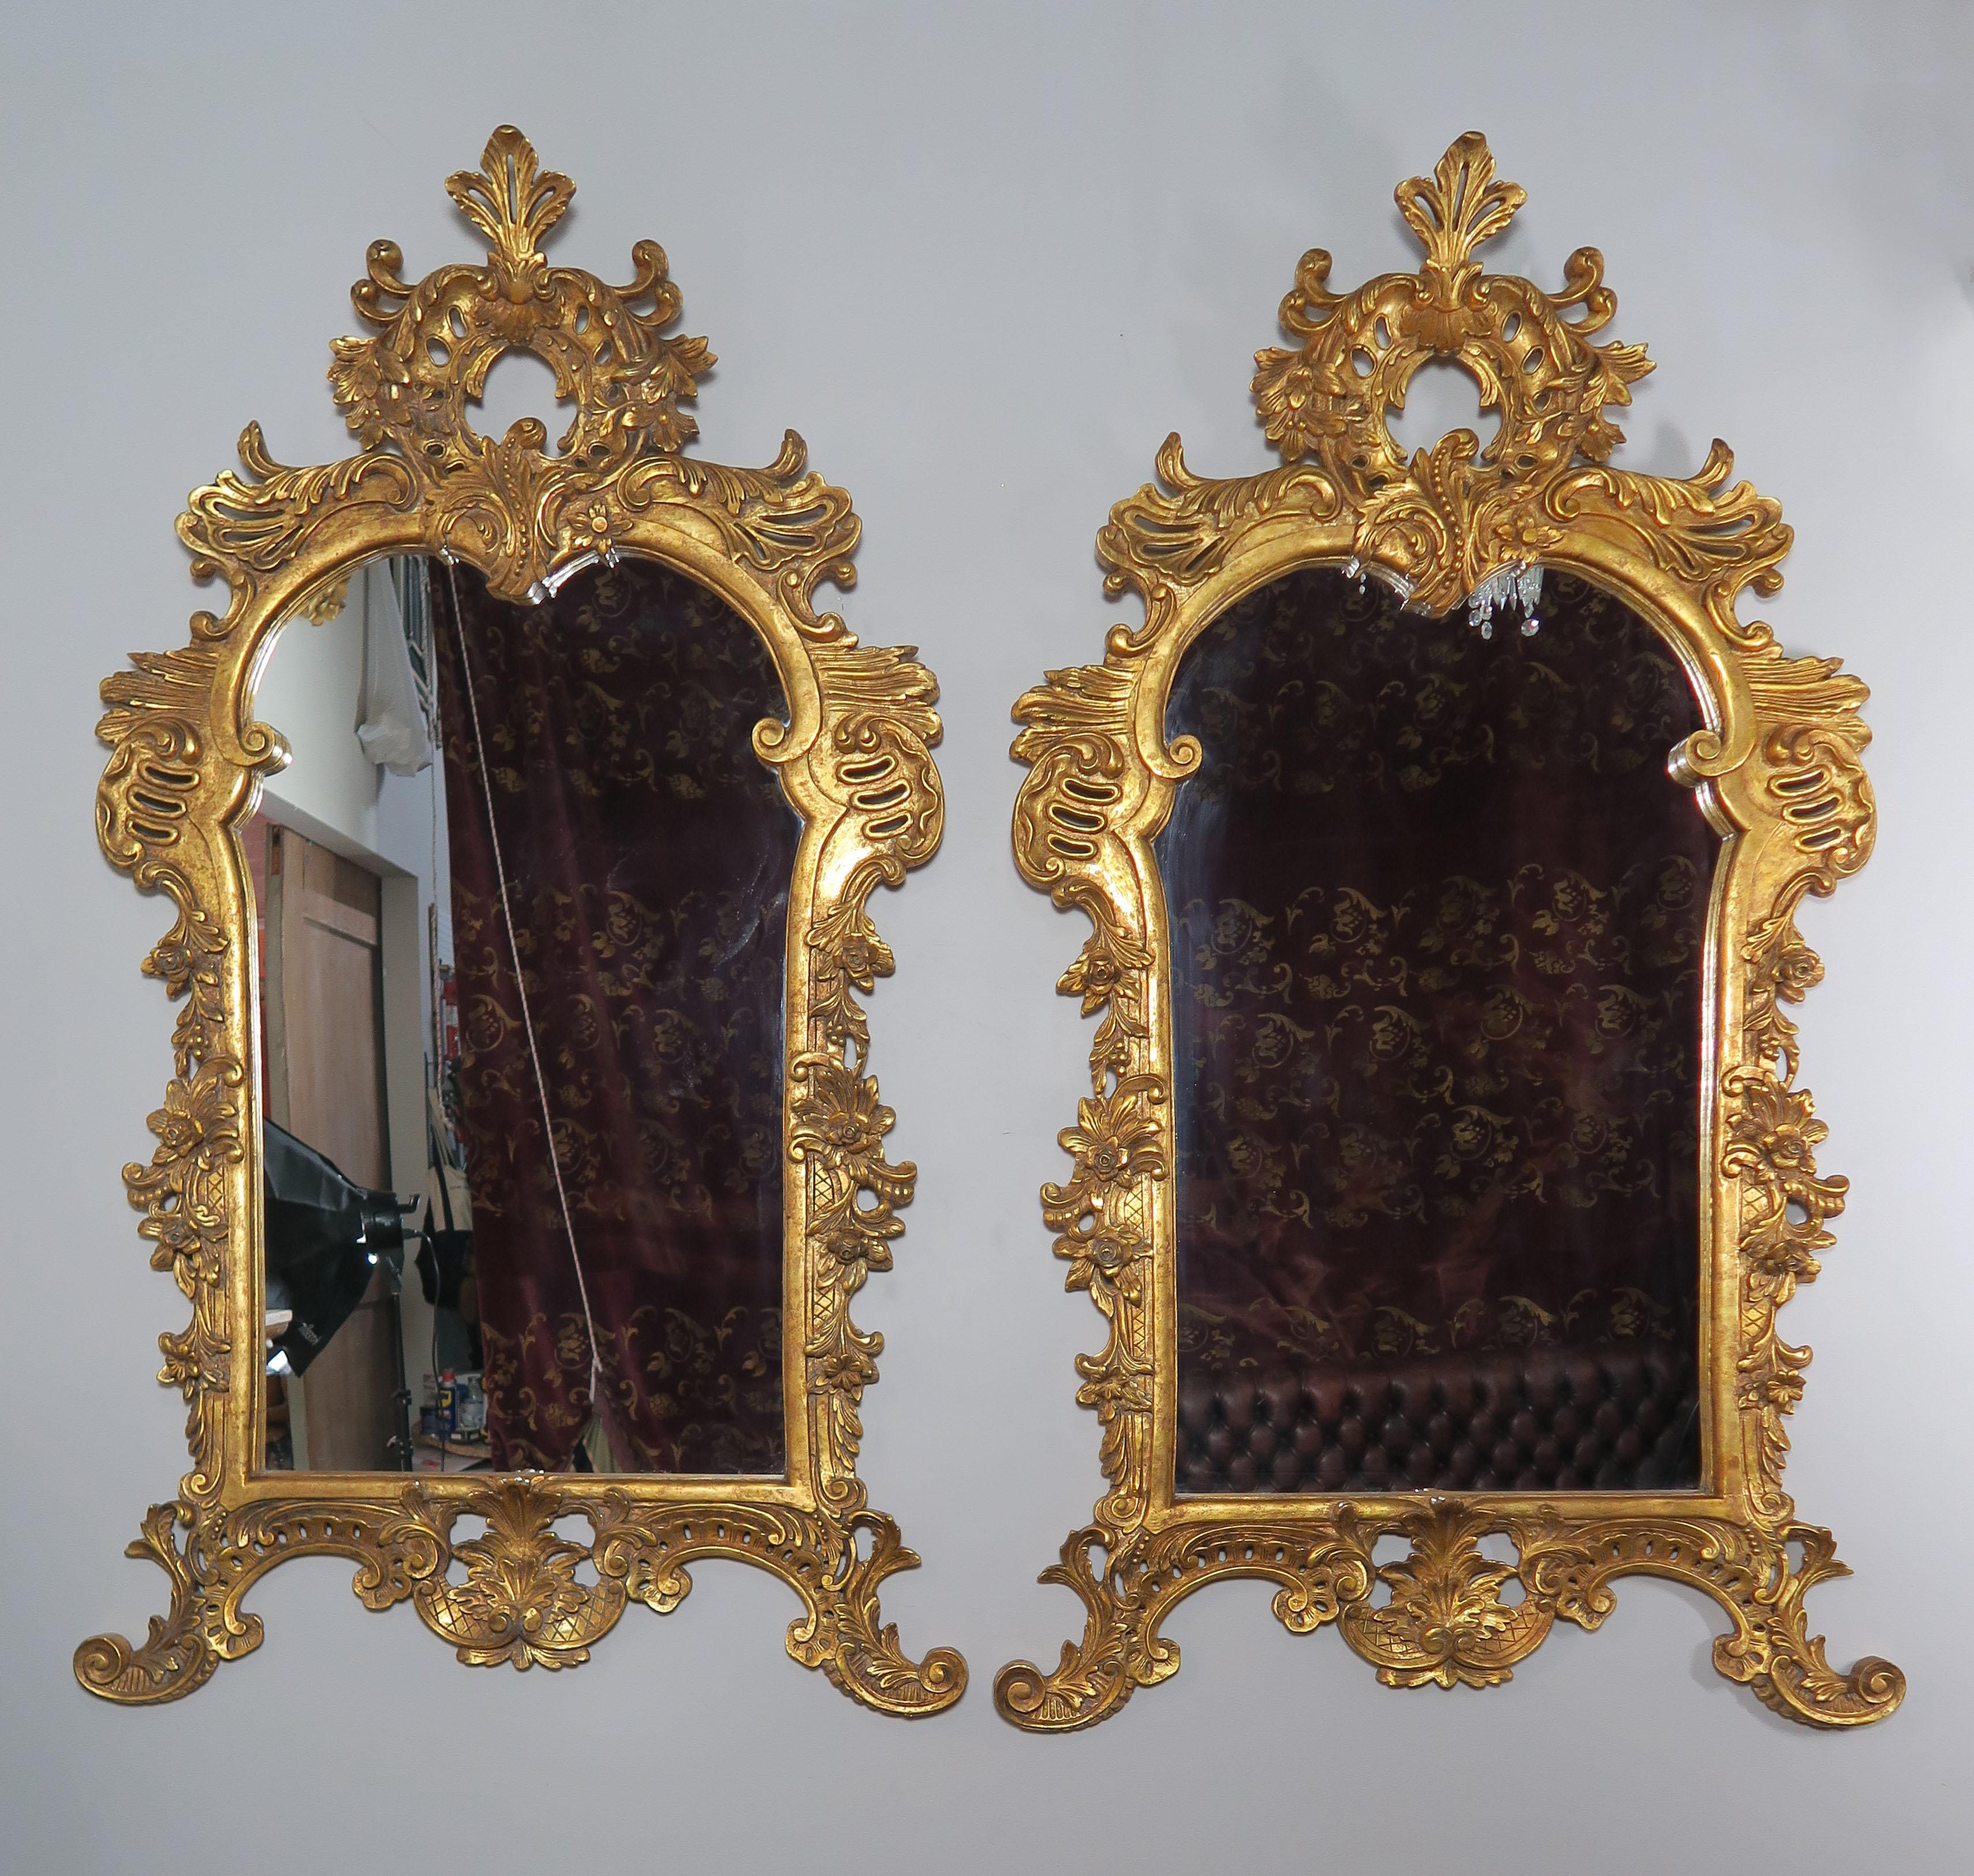 Pair of Monumental French Louis XV style giltwood mirrors intricately carved with acanthus leaves, scrolls and shells throughout. 22-karat gold leaf finish.